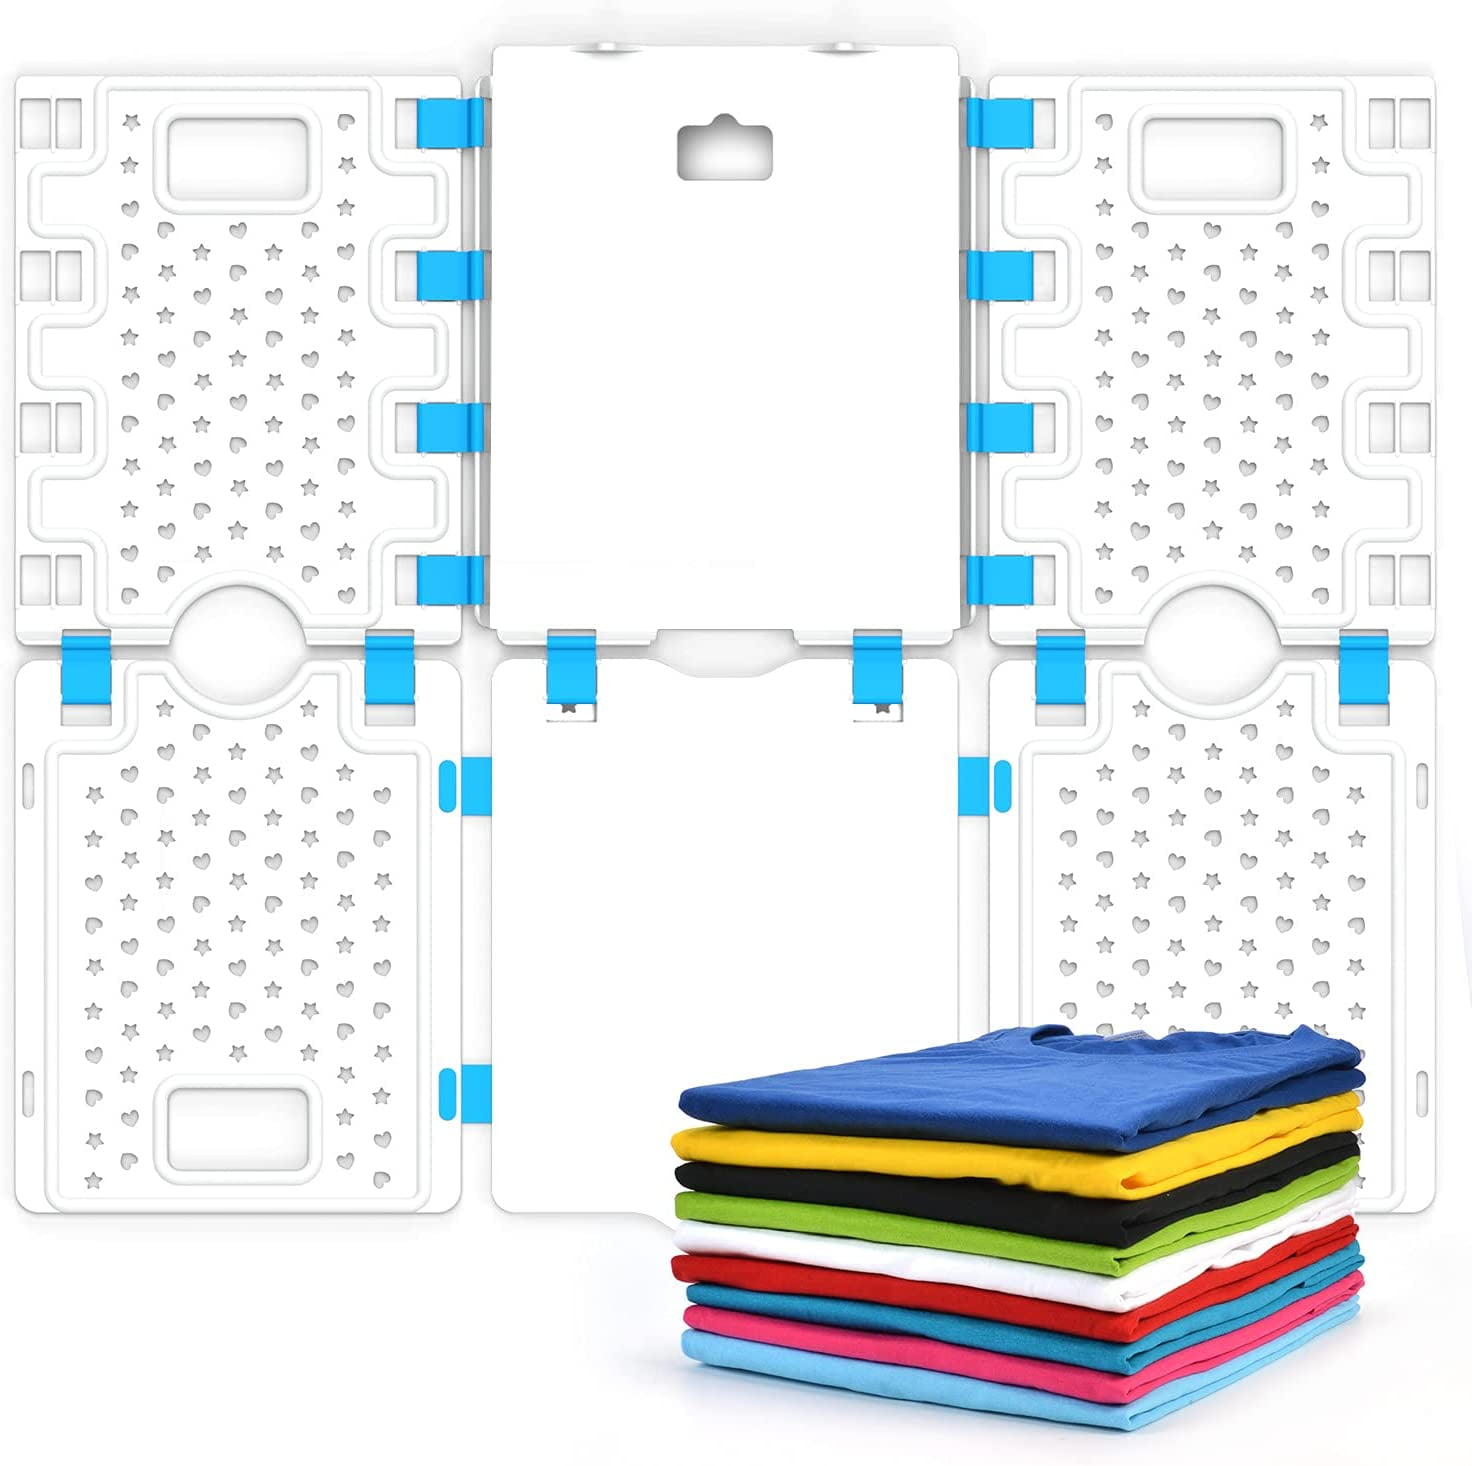 IMMEKEY Shirt Folding Board with Shirt Bags 100 Pcs10x13 inches with  Clothing Size Stickers Labels 7 Sizes 3500 Pcs, for Adults and Children  Shirt